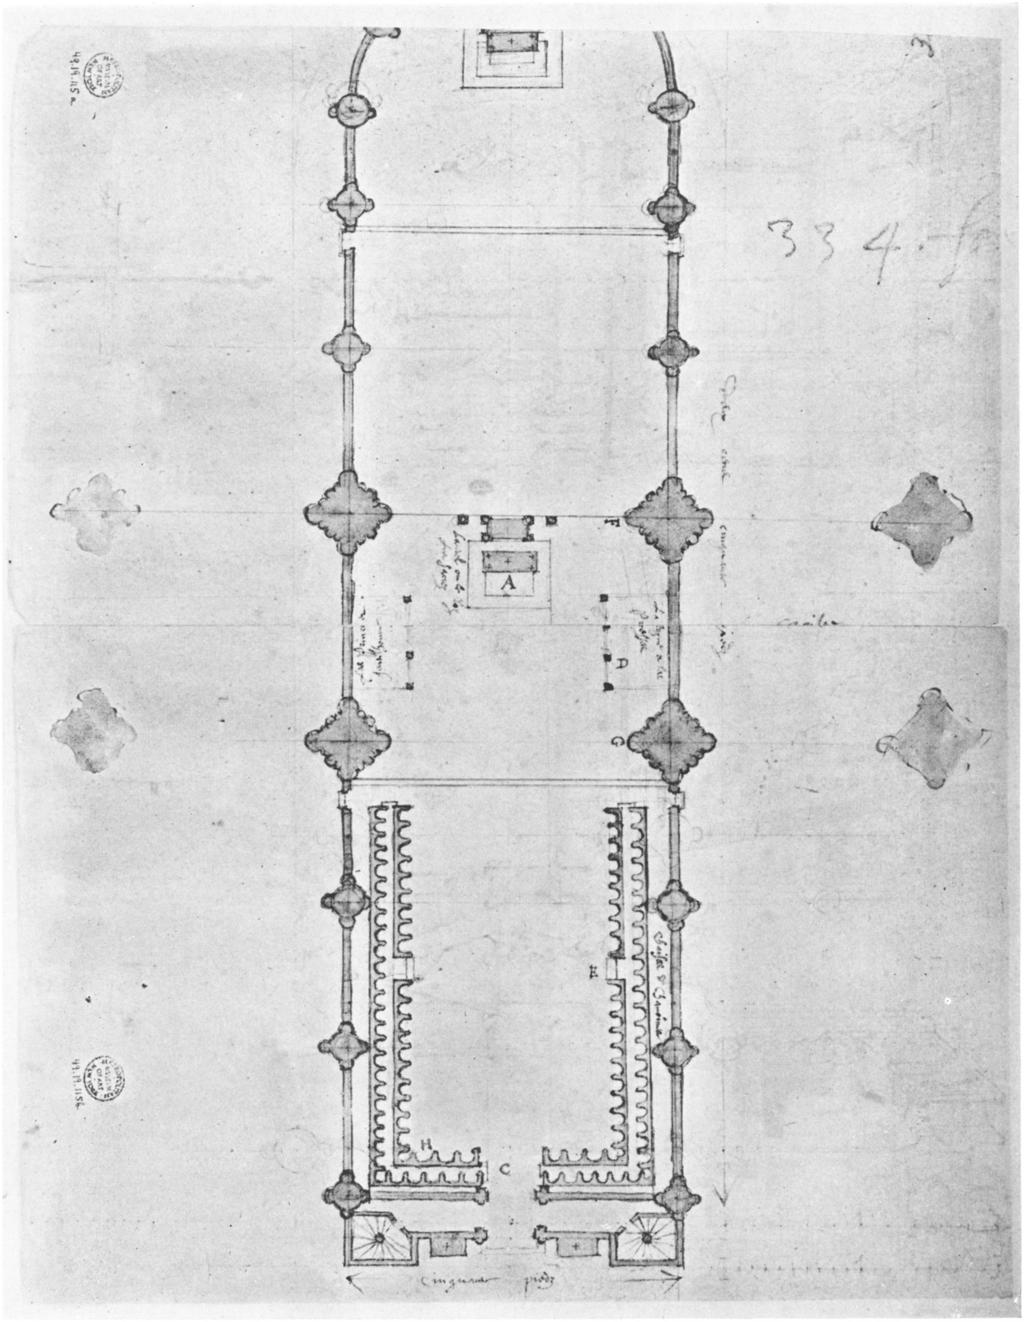 Plan of the sanctuary of a medieval cathedral. The main altar, A, is in the transept, and the choir stalls are in the nave.